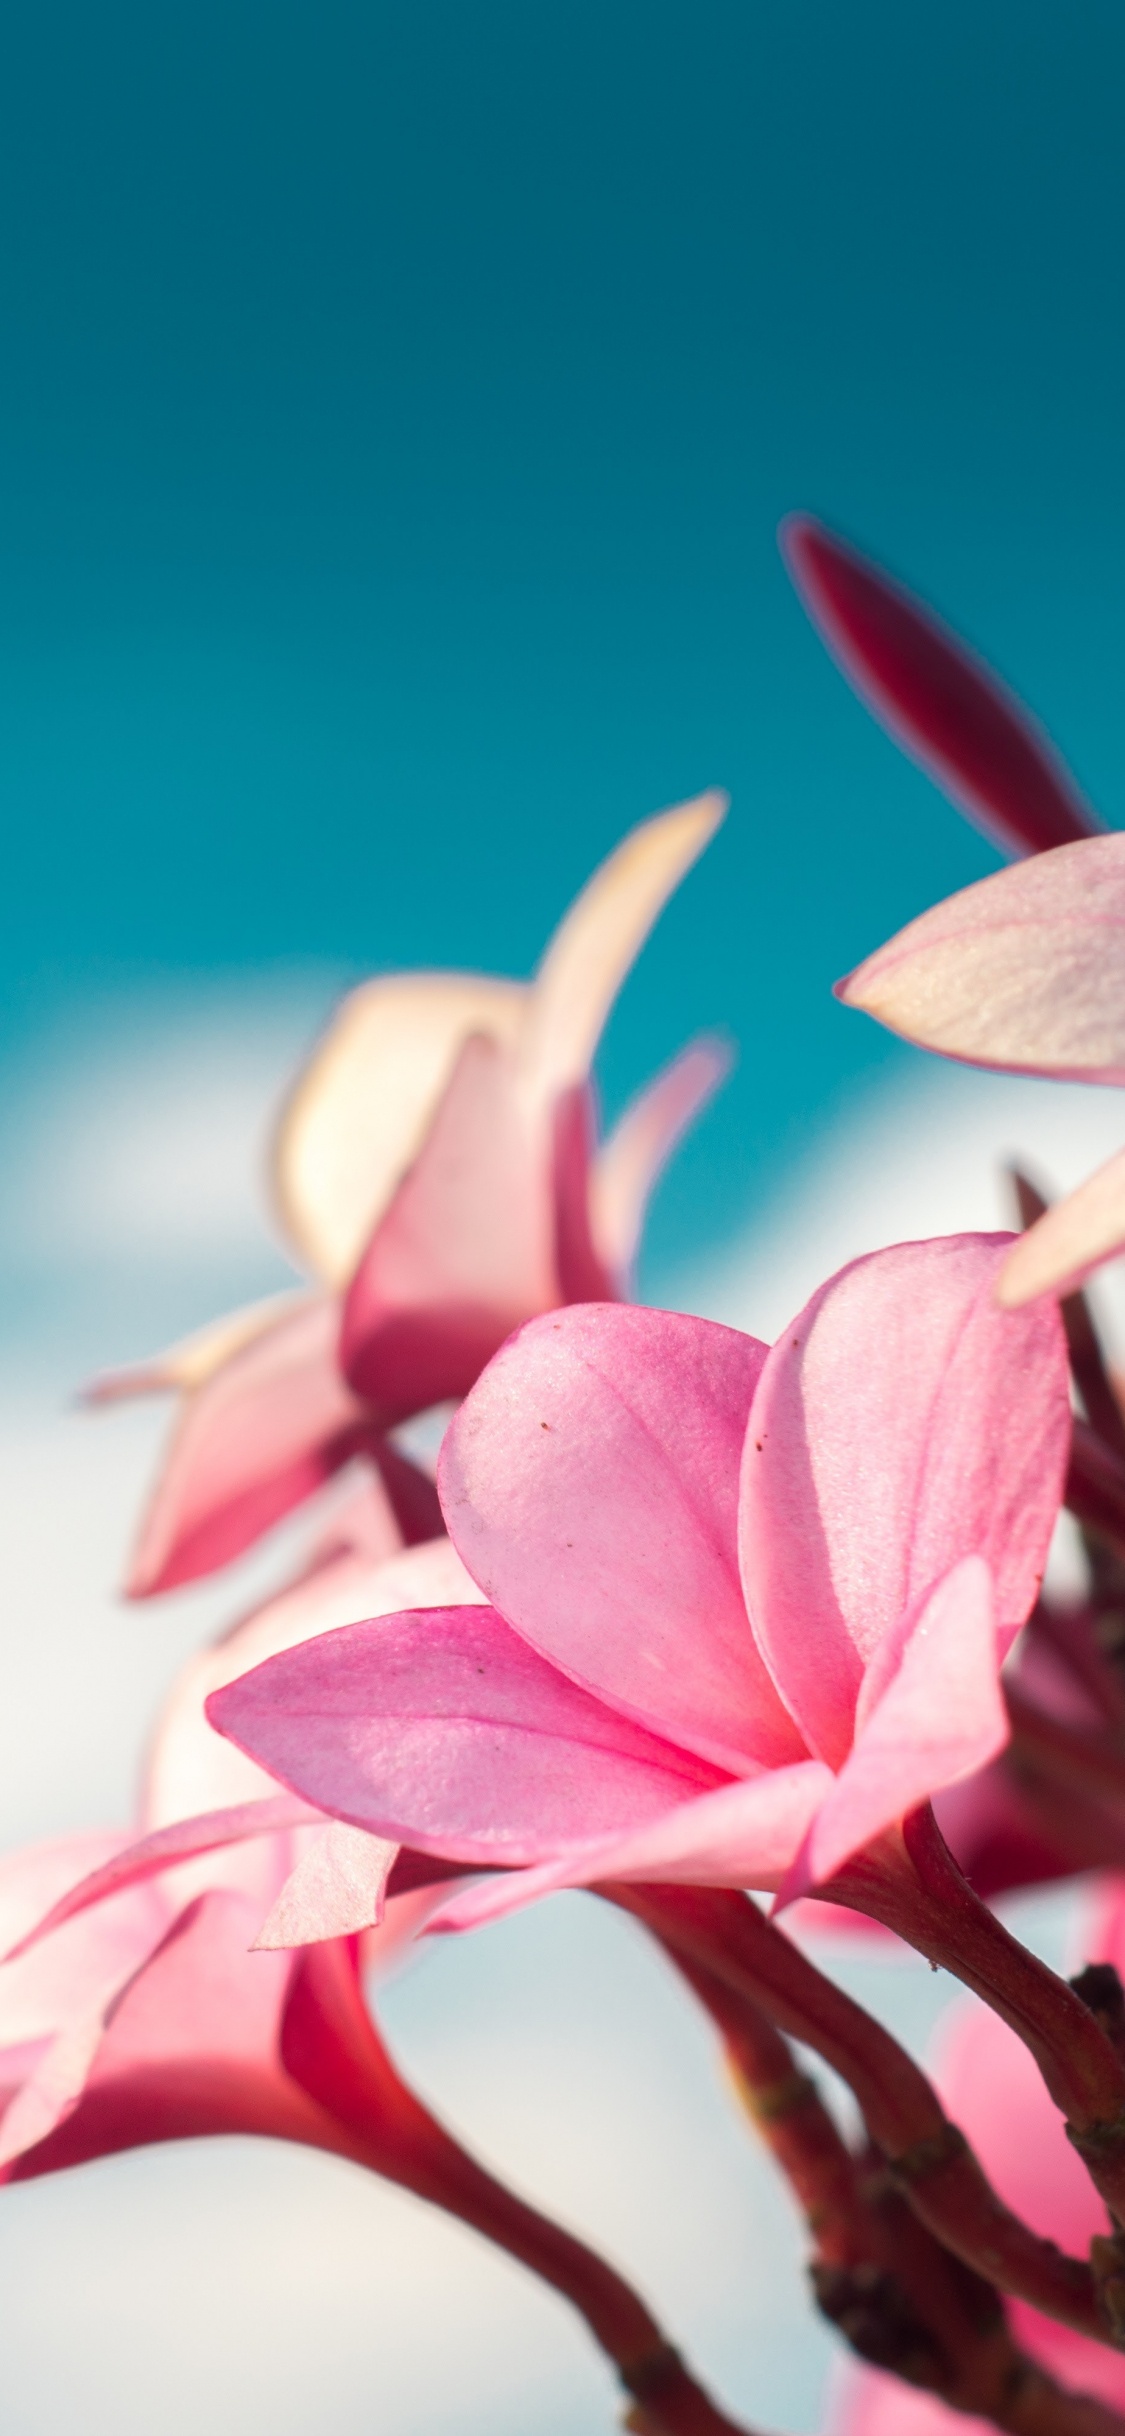 Pink and White Flower in Close up Photography. Wallpaper in 1125x2436 Resolution